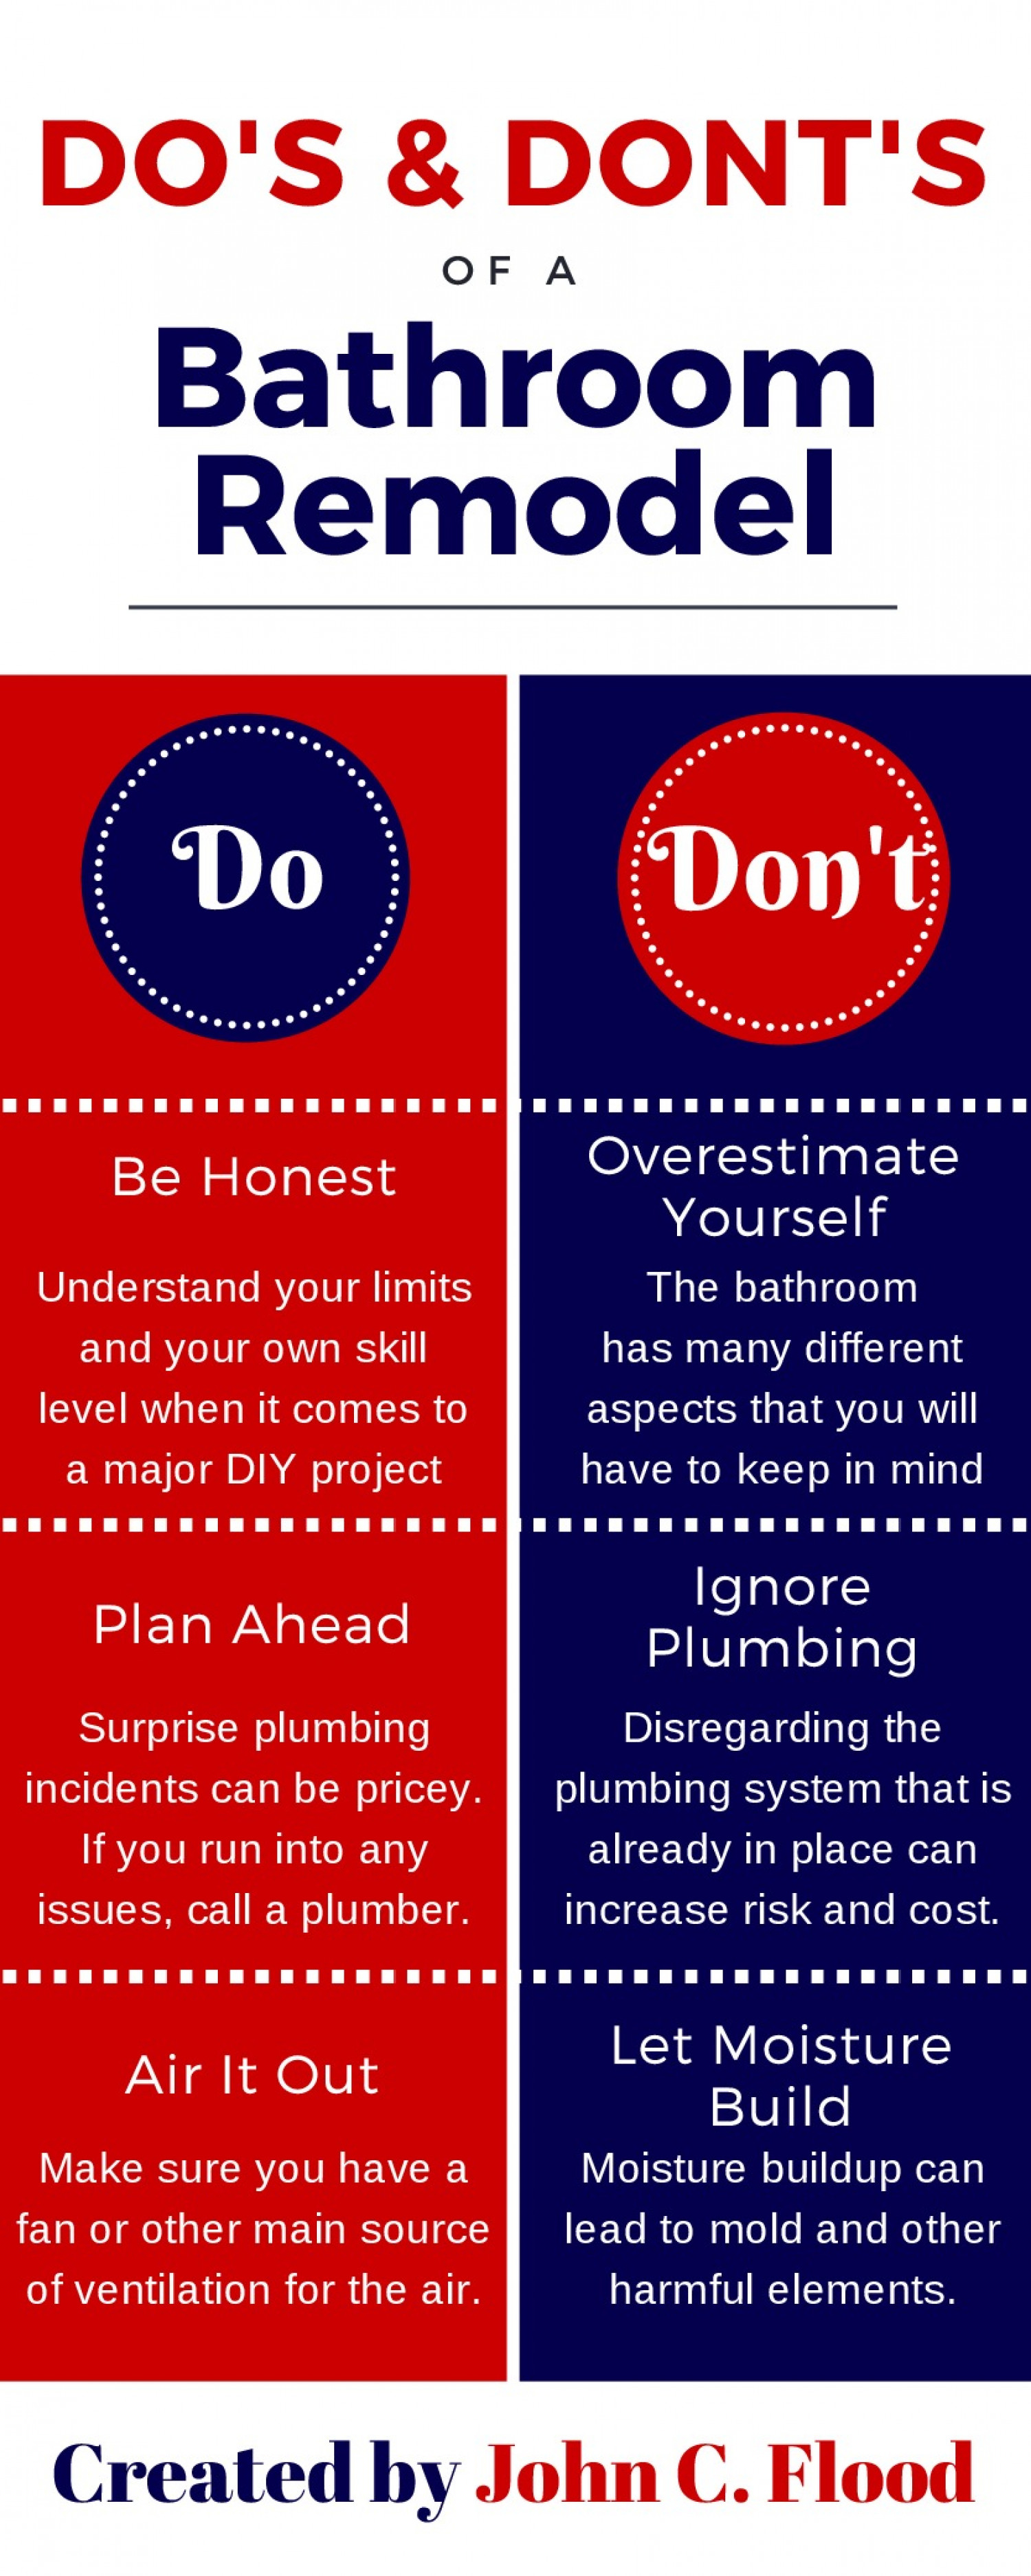 The Do's and Don'ts of Remodeling Your Bathroom Infographic